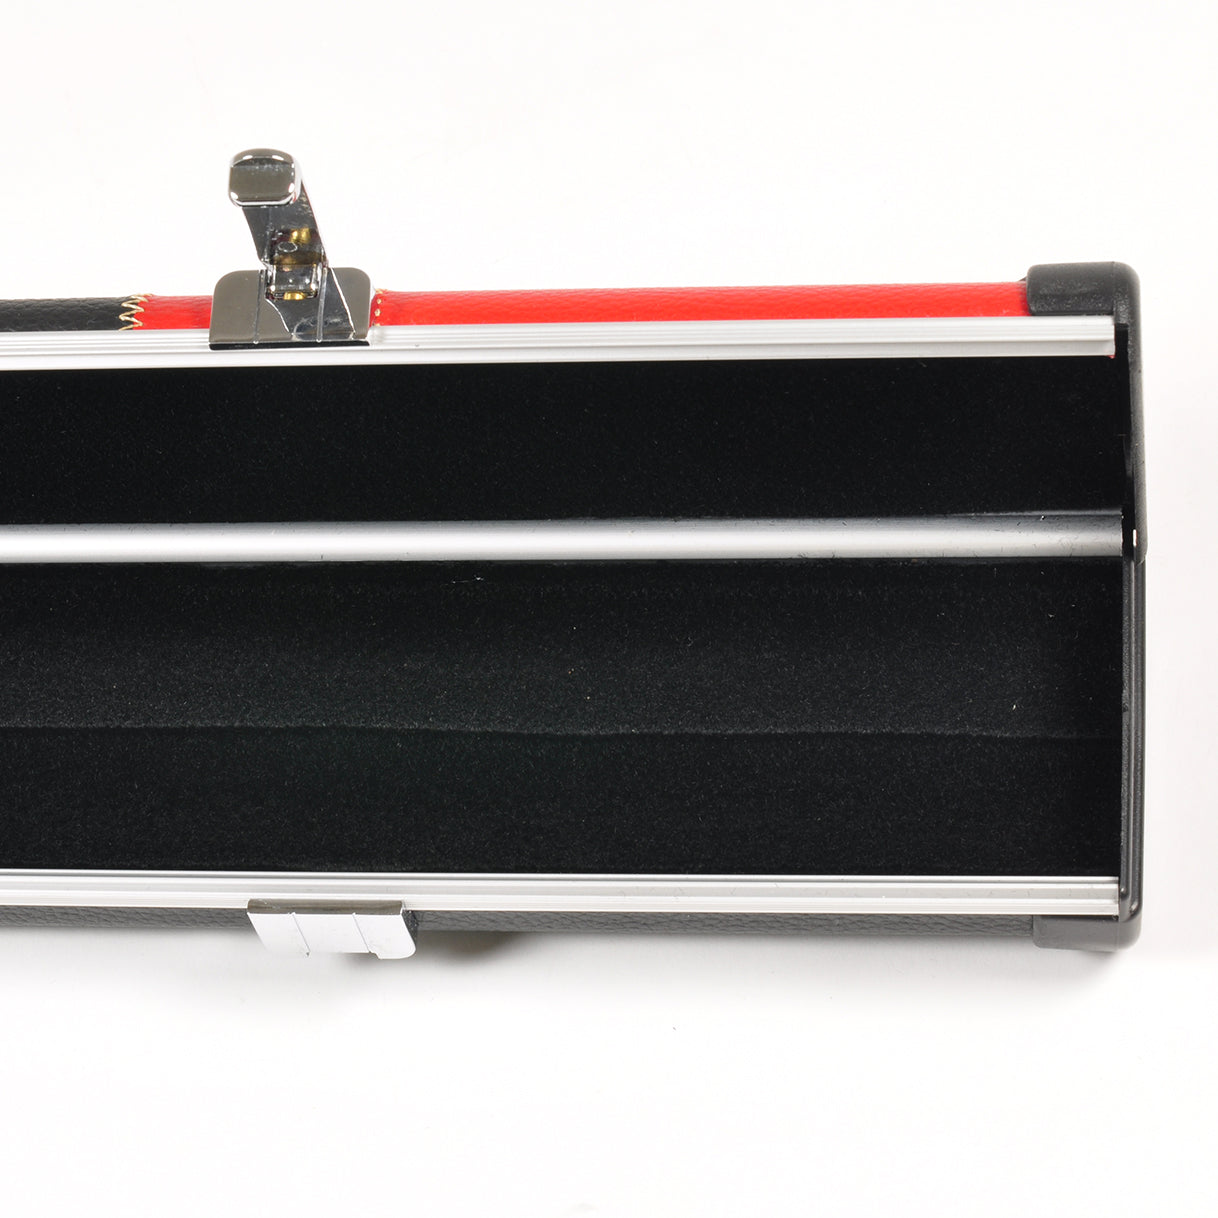 Peradon Black Red Patch Halo Case for 3/4 Cues. Open view